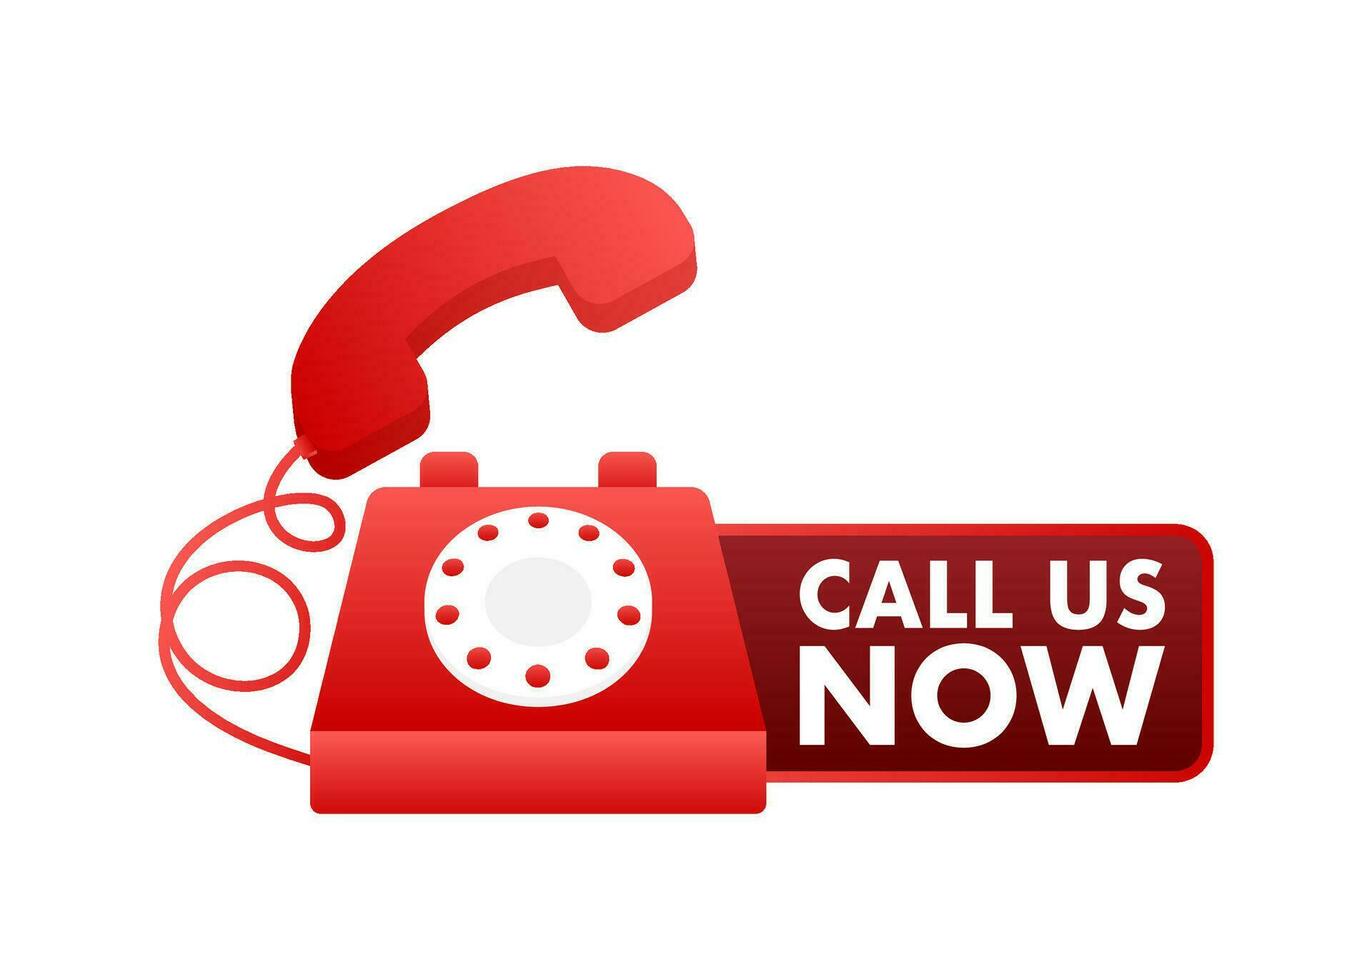 Call us now. Information technology. Telephone icon. Customer service. Vector stock illustration.